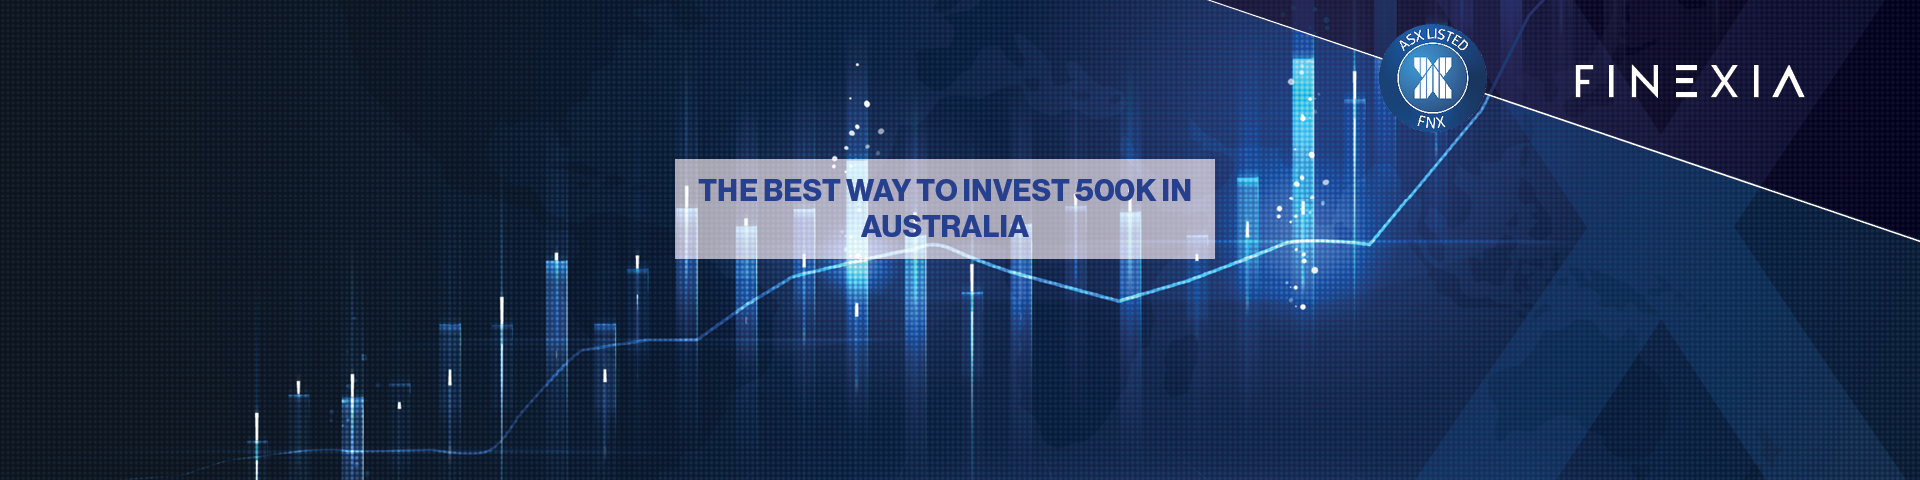 Maximising Your Investment: The Best Way to Invest 500k in Australia